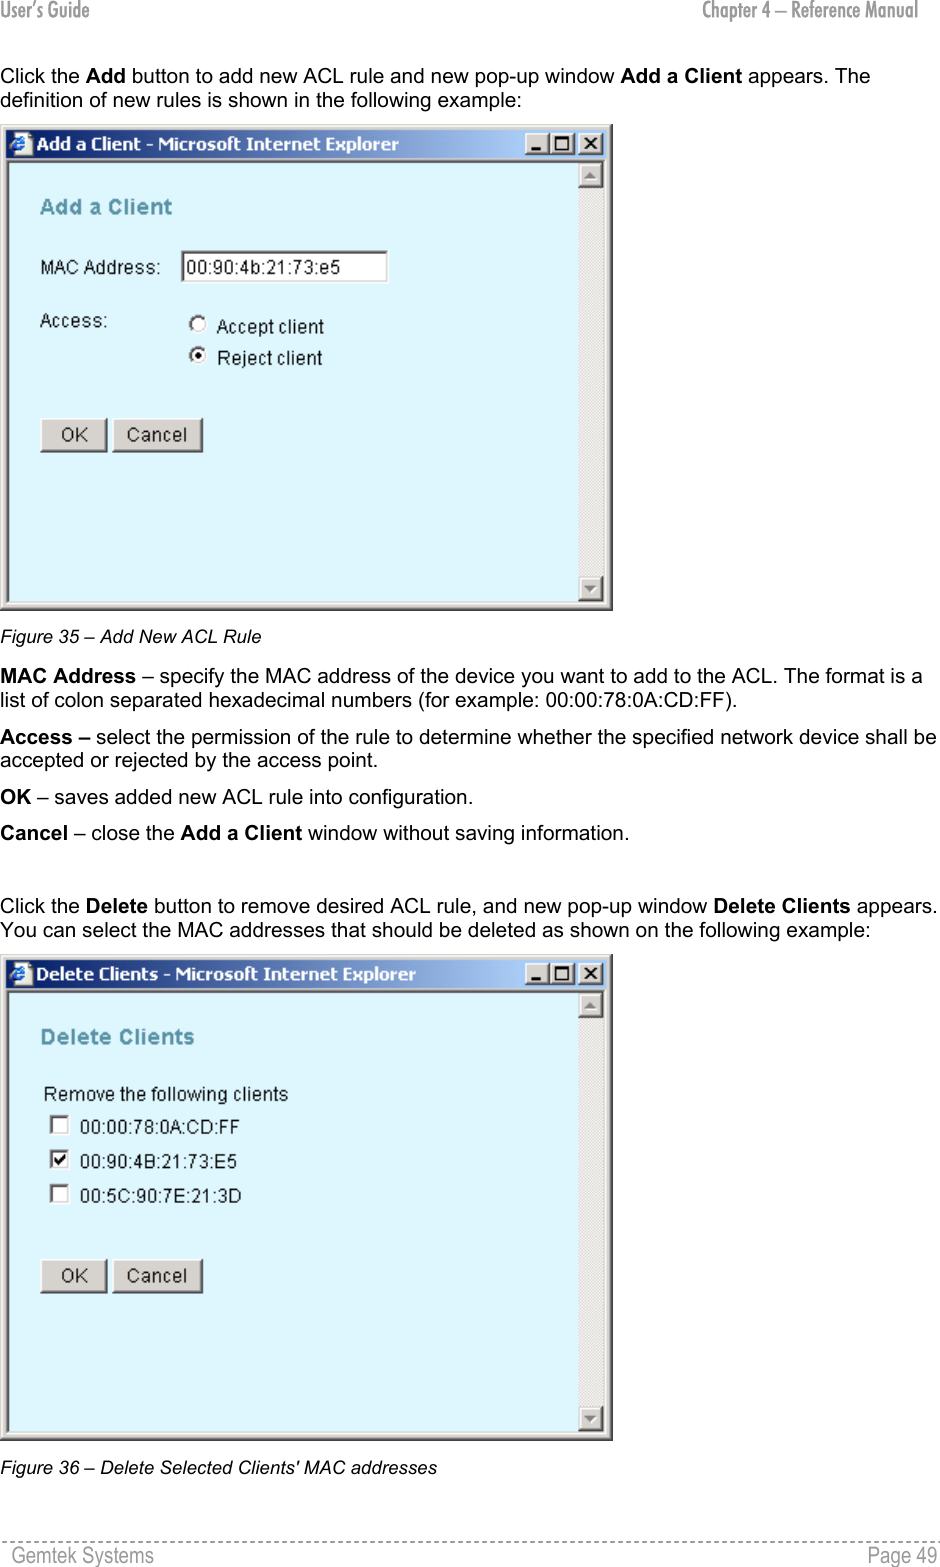 User’s Guide  Chapter 4 – Reference Manual Click the Add button to add new ACL rule and new pop-up window Add a Client appears. The definition of new rules is shown in the following example:  Figure 35 – Add New ACL Rule MAC Address – specify the MAC address of the device you want to add to the ACL. The format is a list of colon separated hexadecimal numbers (for example: 00:00:78:0A:CD:FF). Access – select the permission of the rule to determine whether the specified network device shall be accepted or rejected by the access point. OK – saves added new ACL rule into configuration. Cancel – close the Add a Client window without saving information.  Click the Delete button to remove desired ACL rule, and new pop-up window Delete Clients appears. You can select the MAC addresses that should be deleted as shown on the following example:  Figure 36 – Delete Selected Clients&apos; MAC addresses Gemtek Systems    Page 49  